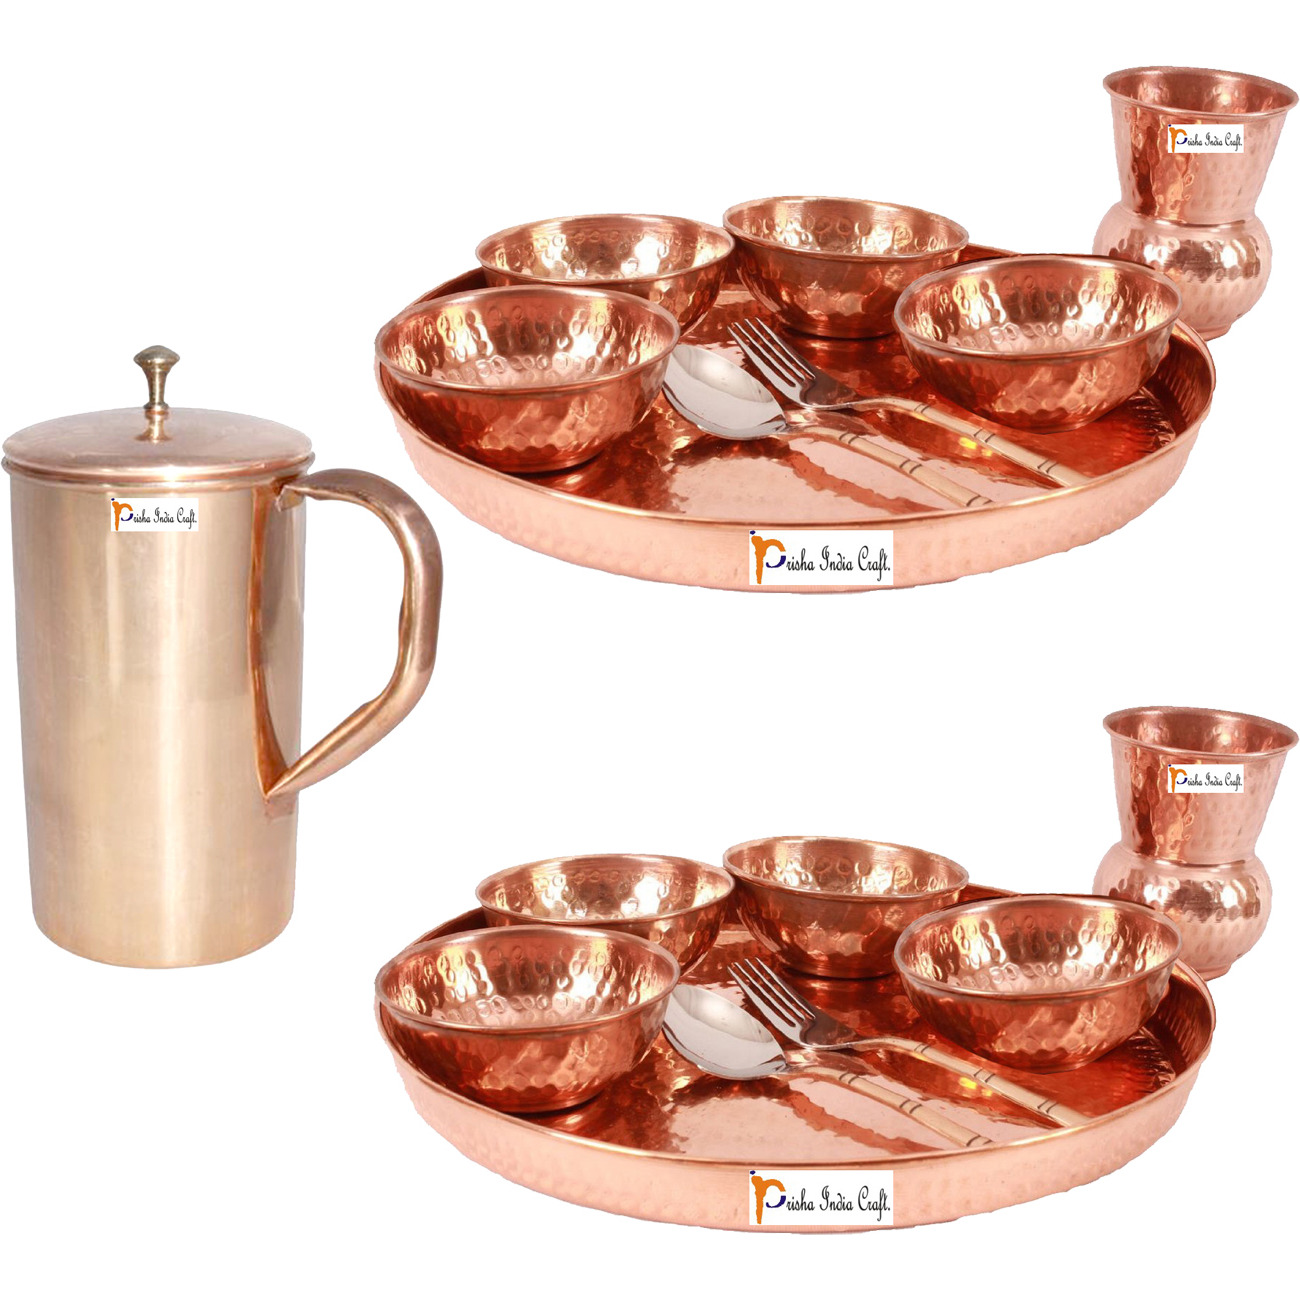 Prisha India Craft B. Set of 2 Dinnerware Traditional 100% Pure Copper Dinner Set of Thali Plate, Bowls, Glass and Spoon, Dia 12  With 1 Pure Copper Classic Pitcher Jug - Christmas Gift